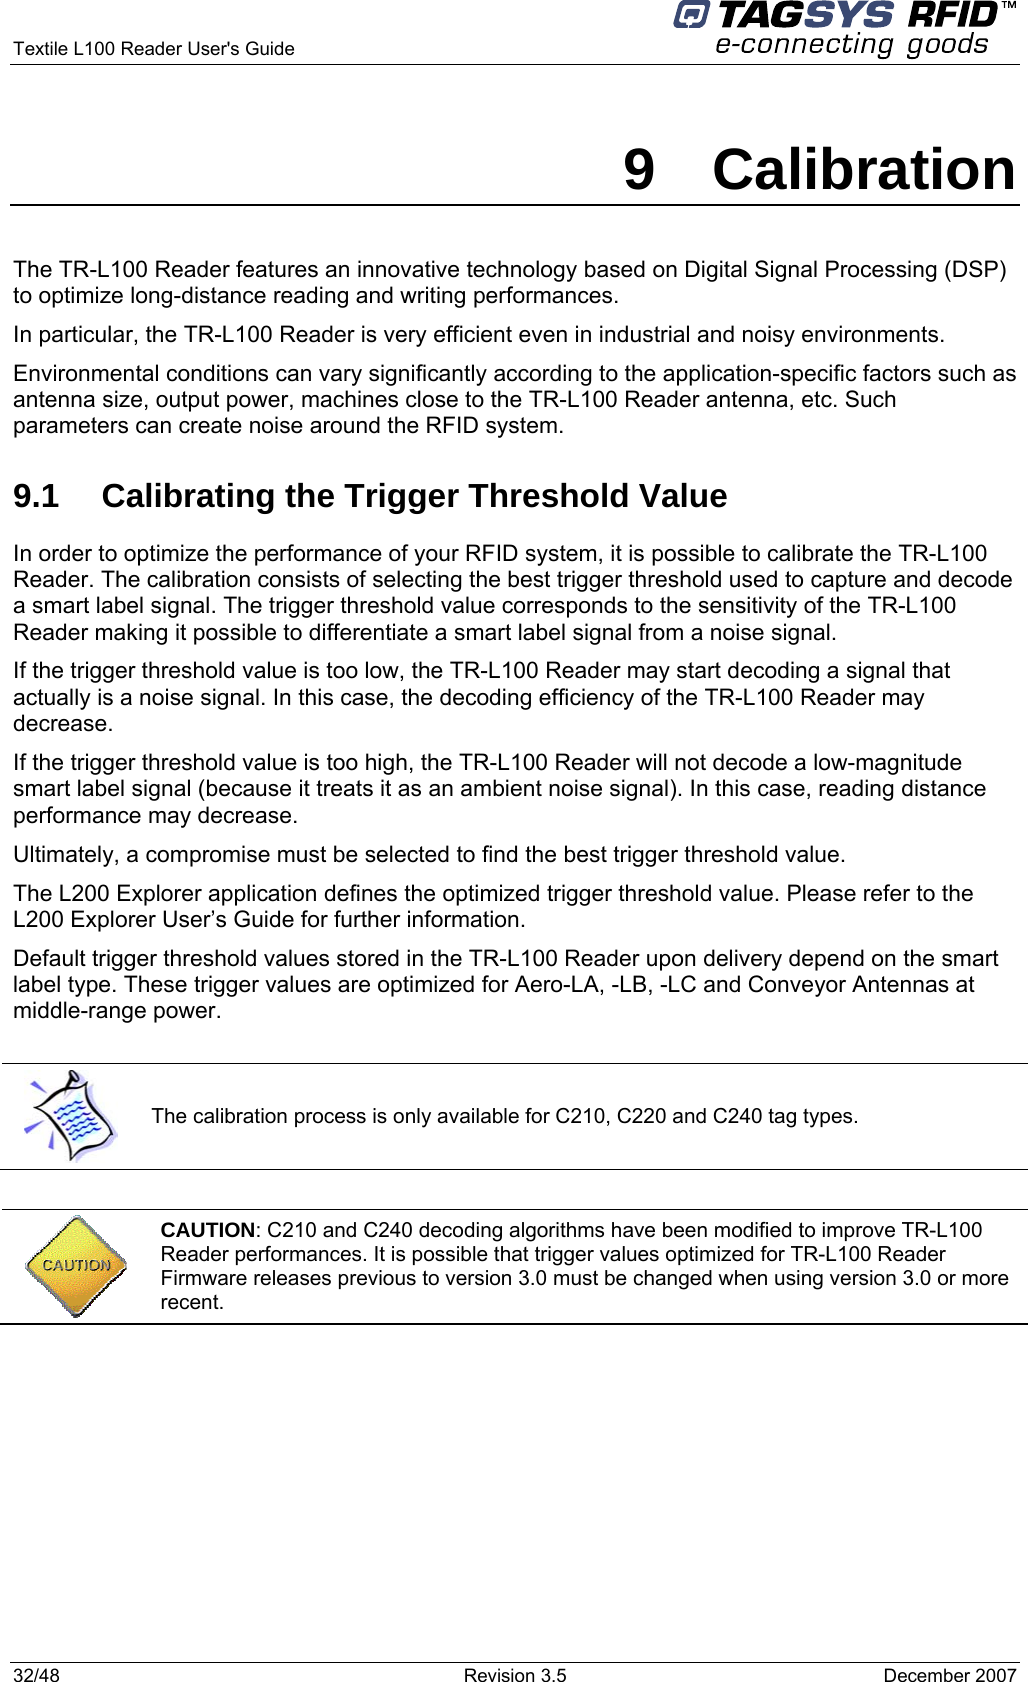  Textile L100 Reader User&apos;s Guide     32/48  Revision 3.5  December 2007 9 Calibration The TR-L100 Reader features an innovative technology based on Digital Signal Processing (DSP) to optimize long-distance reading and writing performances. In particular, the TR-L100 Reader is very efficient even in industrial and noisy environments. Environmental conditions can vary significantly according to the application-specific factors such as antenna size, output power, machines close to the TR-L100 Reader antenna, etc. Such parameters can create noise around the RFID system. 9.1  Calibrating the Trigger Threshold Value In order to optimize the performance of your RFID system, it is possible to calibrate the TR-L100 Reader. The calibration consists of selecting the best trigger threshold used to capture and decode a smart label signal. The trigger threshold value corresponds to the sensitivity of the TR-L100 Reader making it possible to differentiate a smart label signal from a noise signal. If the trigger threshold value is too low, the TR-L100 Reader may start decoding a signal that actually is a noise signal. In this case, the decoding efficiency of the TR-L100 Reader may decrease. If the trigger threshold value is too high, the TR-L100 Reader will not decode a low-magnitude smart label signal (because it treats it as an ambient noise signal). In this case, reading distance performance may decrease. Ultimately, a compromise must be selected to find the best trigger threshold value. The L200 Explorer application defines the optimized trigger threshold value. Please refer to the L200 Explorer User’s Guide for further information. Default trigger threshold values stored in the TR-L100 Reader upon delivery depend on the smart label type. These trigger values are optimized for Aero-LA, -LB, -LC and Conveyor Antennas at middle-range power.   The calibration process is only available for C210, C220 and C240 tag types.   CAUTION: C210 and C240 decoding algorithms have been modified to improve TR-L100 Reader performances. It is possible that trigger values optimized for TR-L100 Reader Firmware releases previous to version 3.0 must be changed when using version 3.0 or more recent.  